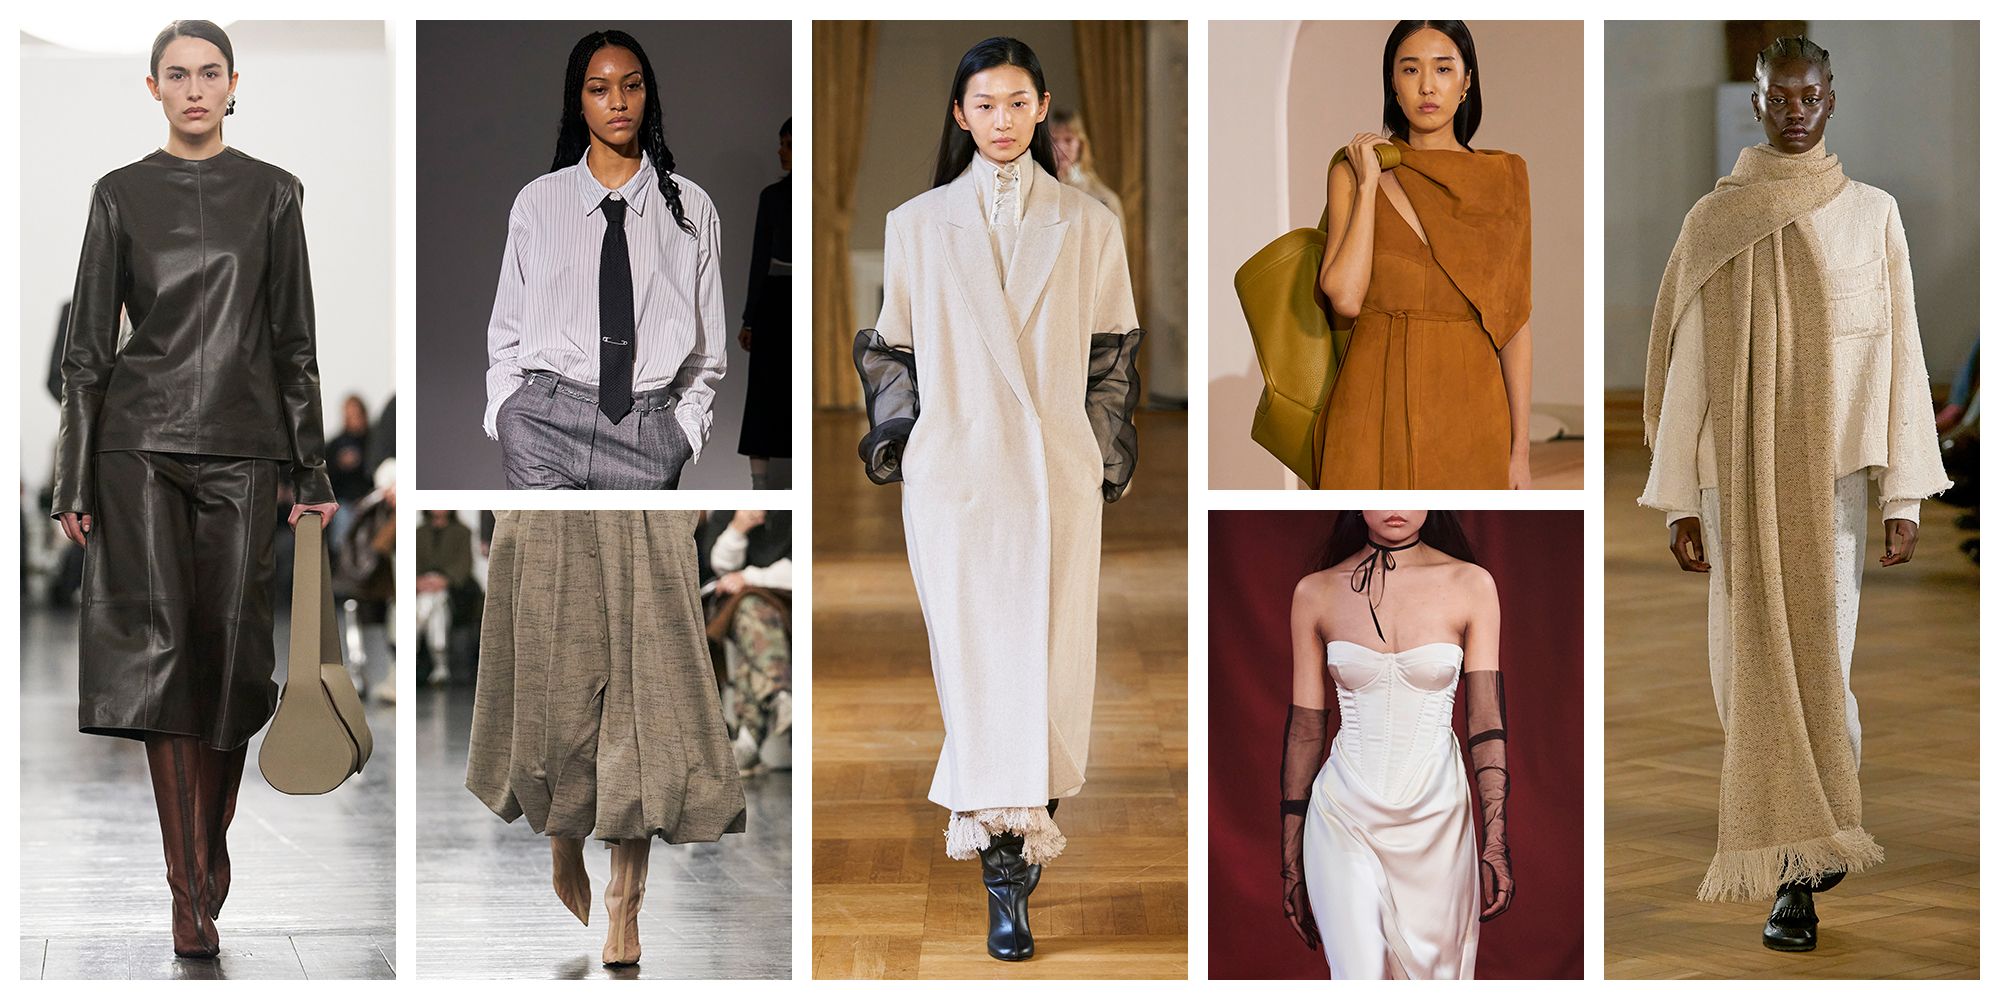 Baggy Fashion Is In: What I Learned Embracing the Trend